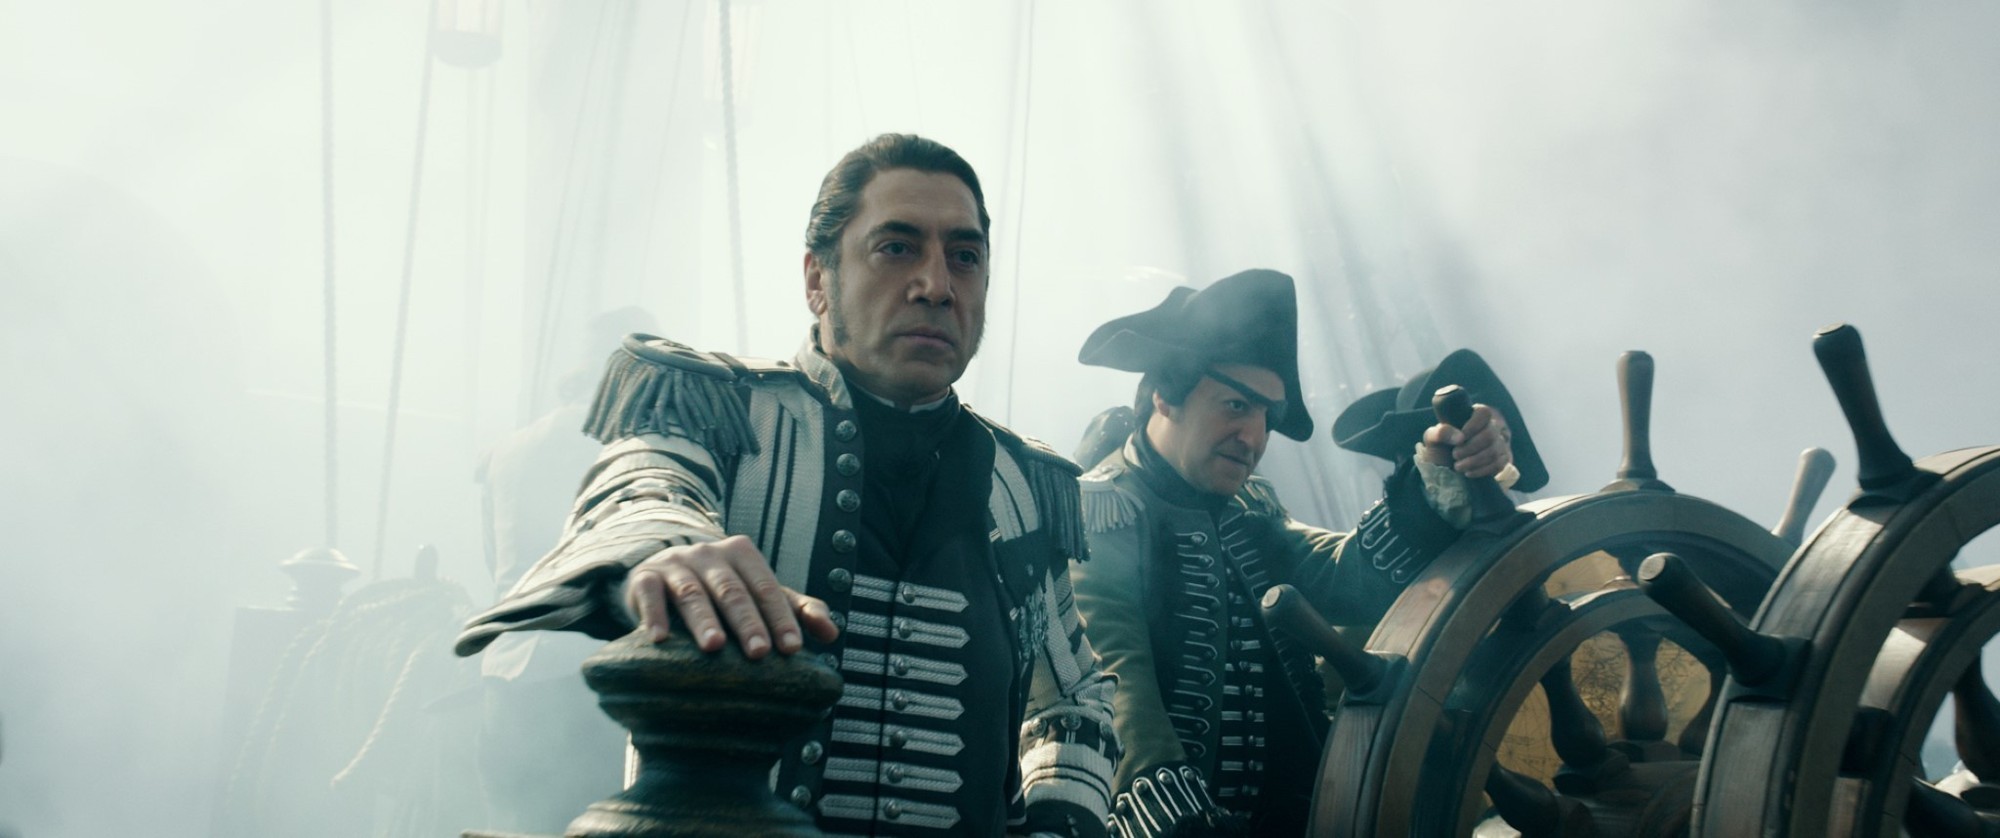 Javier Bardem stars as Captain Salazar in Walt Disney Pictures' Pirates of the Caribbean: Dead Men Tell No Tales (2017)